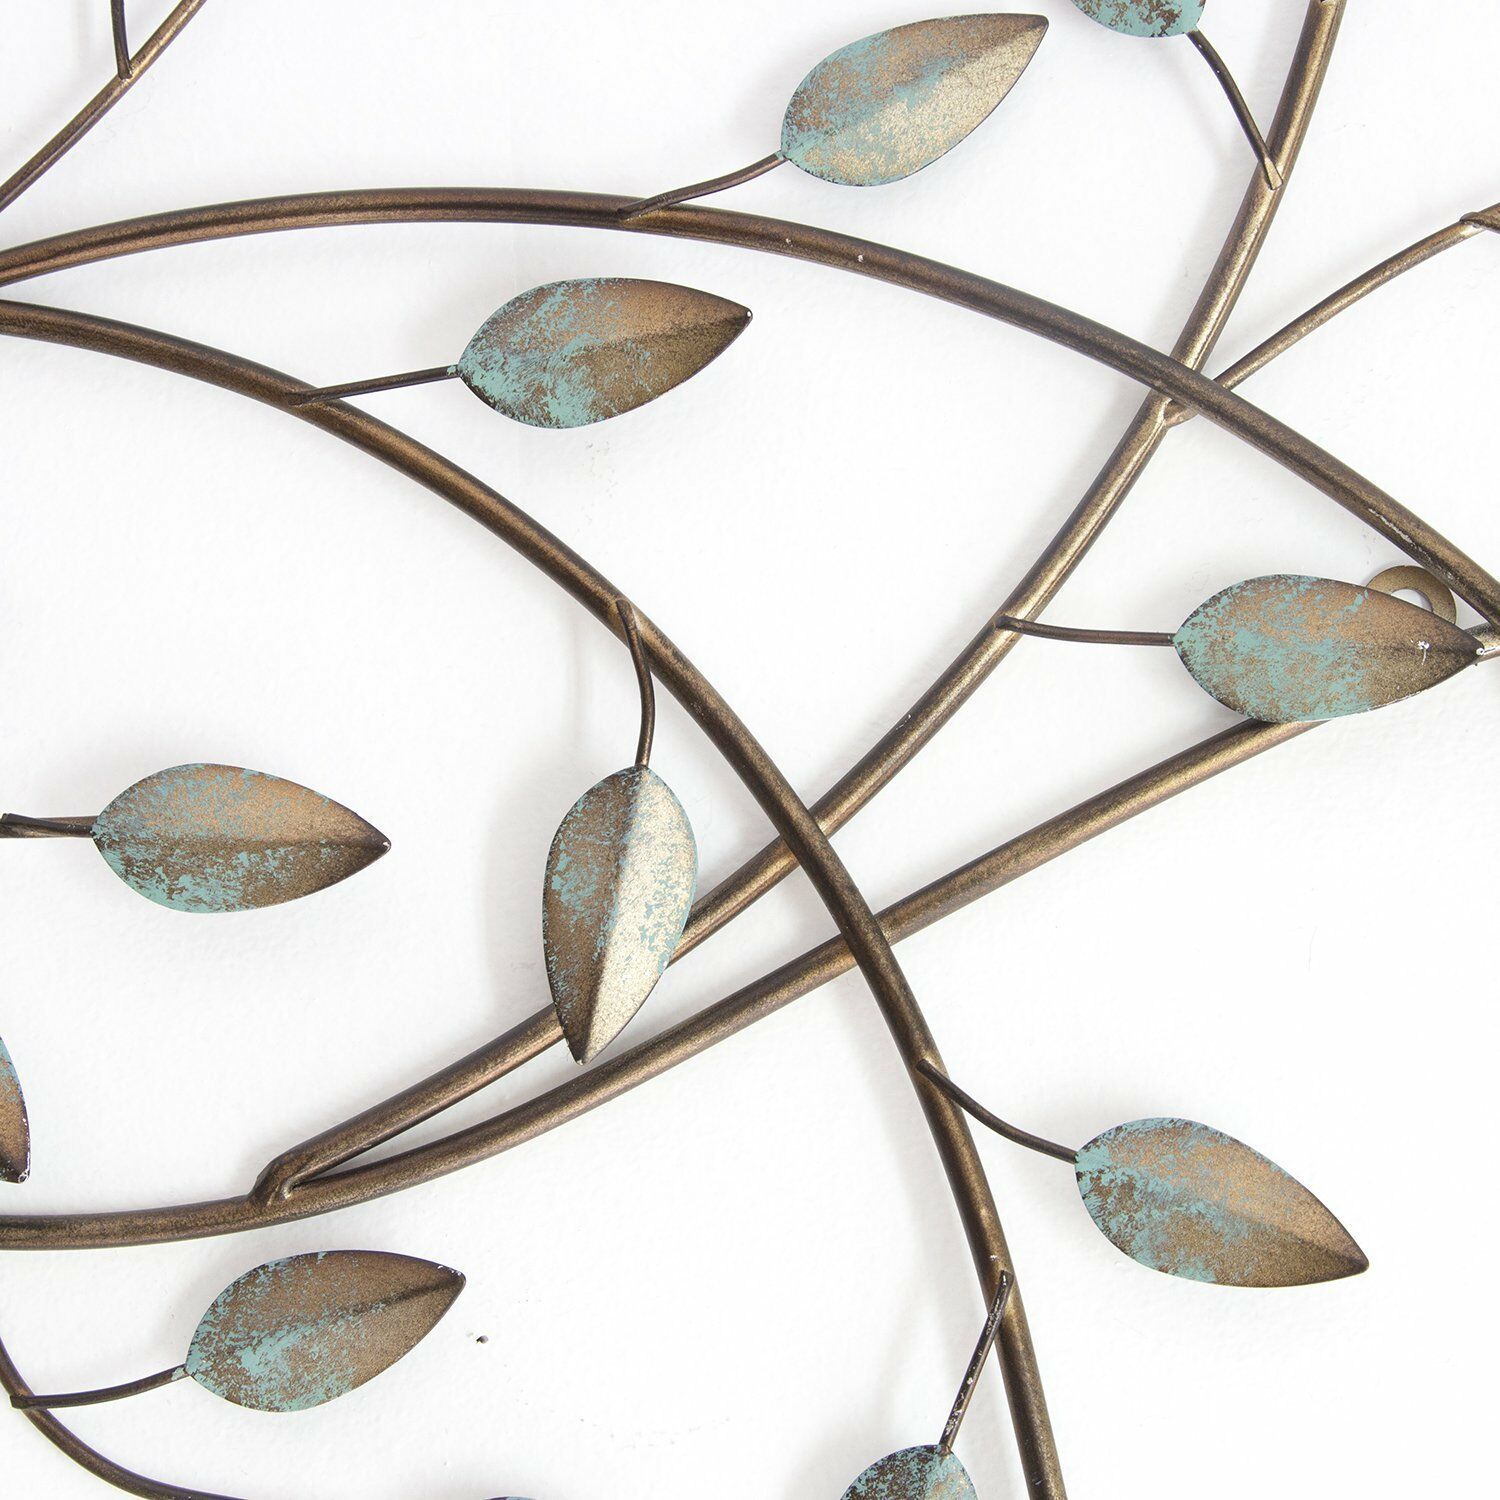 Gold And Teal Metal Leaves Hanging Interior Wall Art Home Decor | Ebay With Regard To Most Recently Released Gold Leaves Wall Art (View 6 of 20)